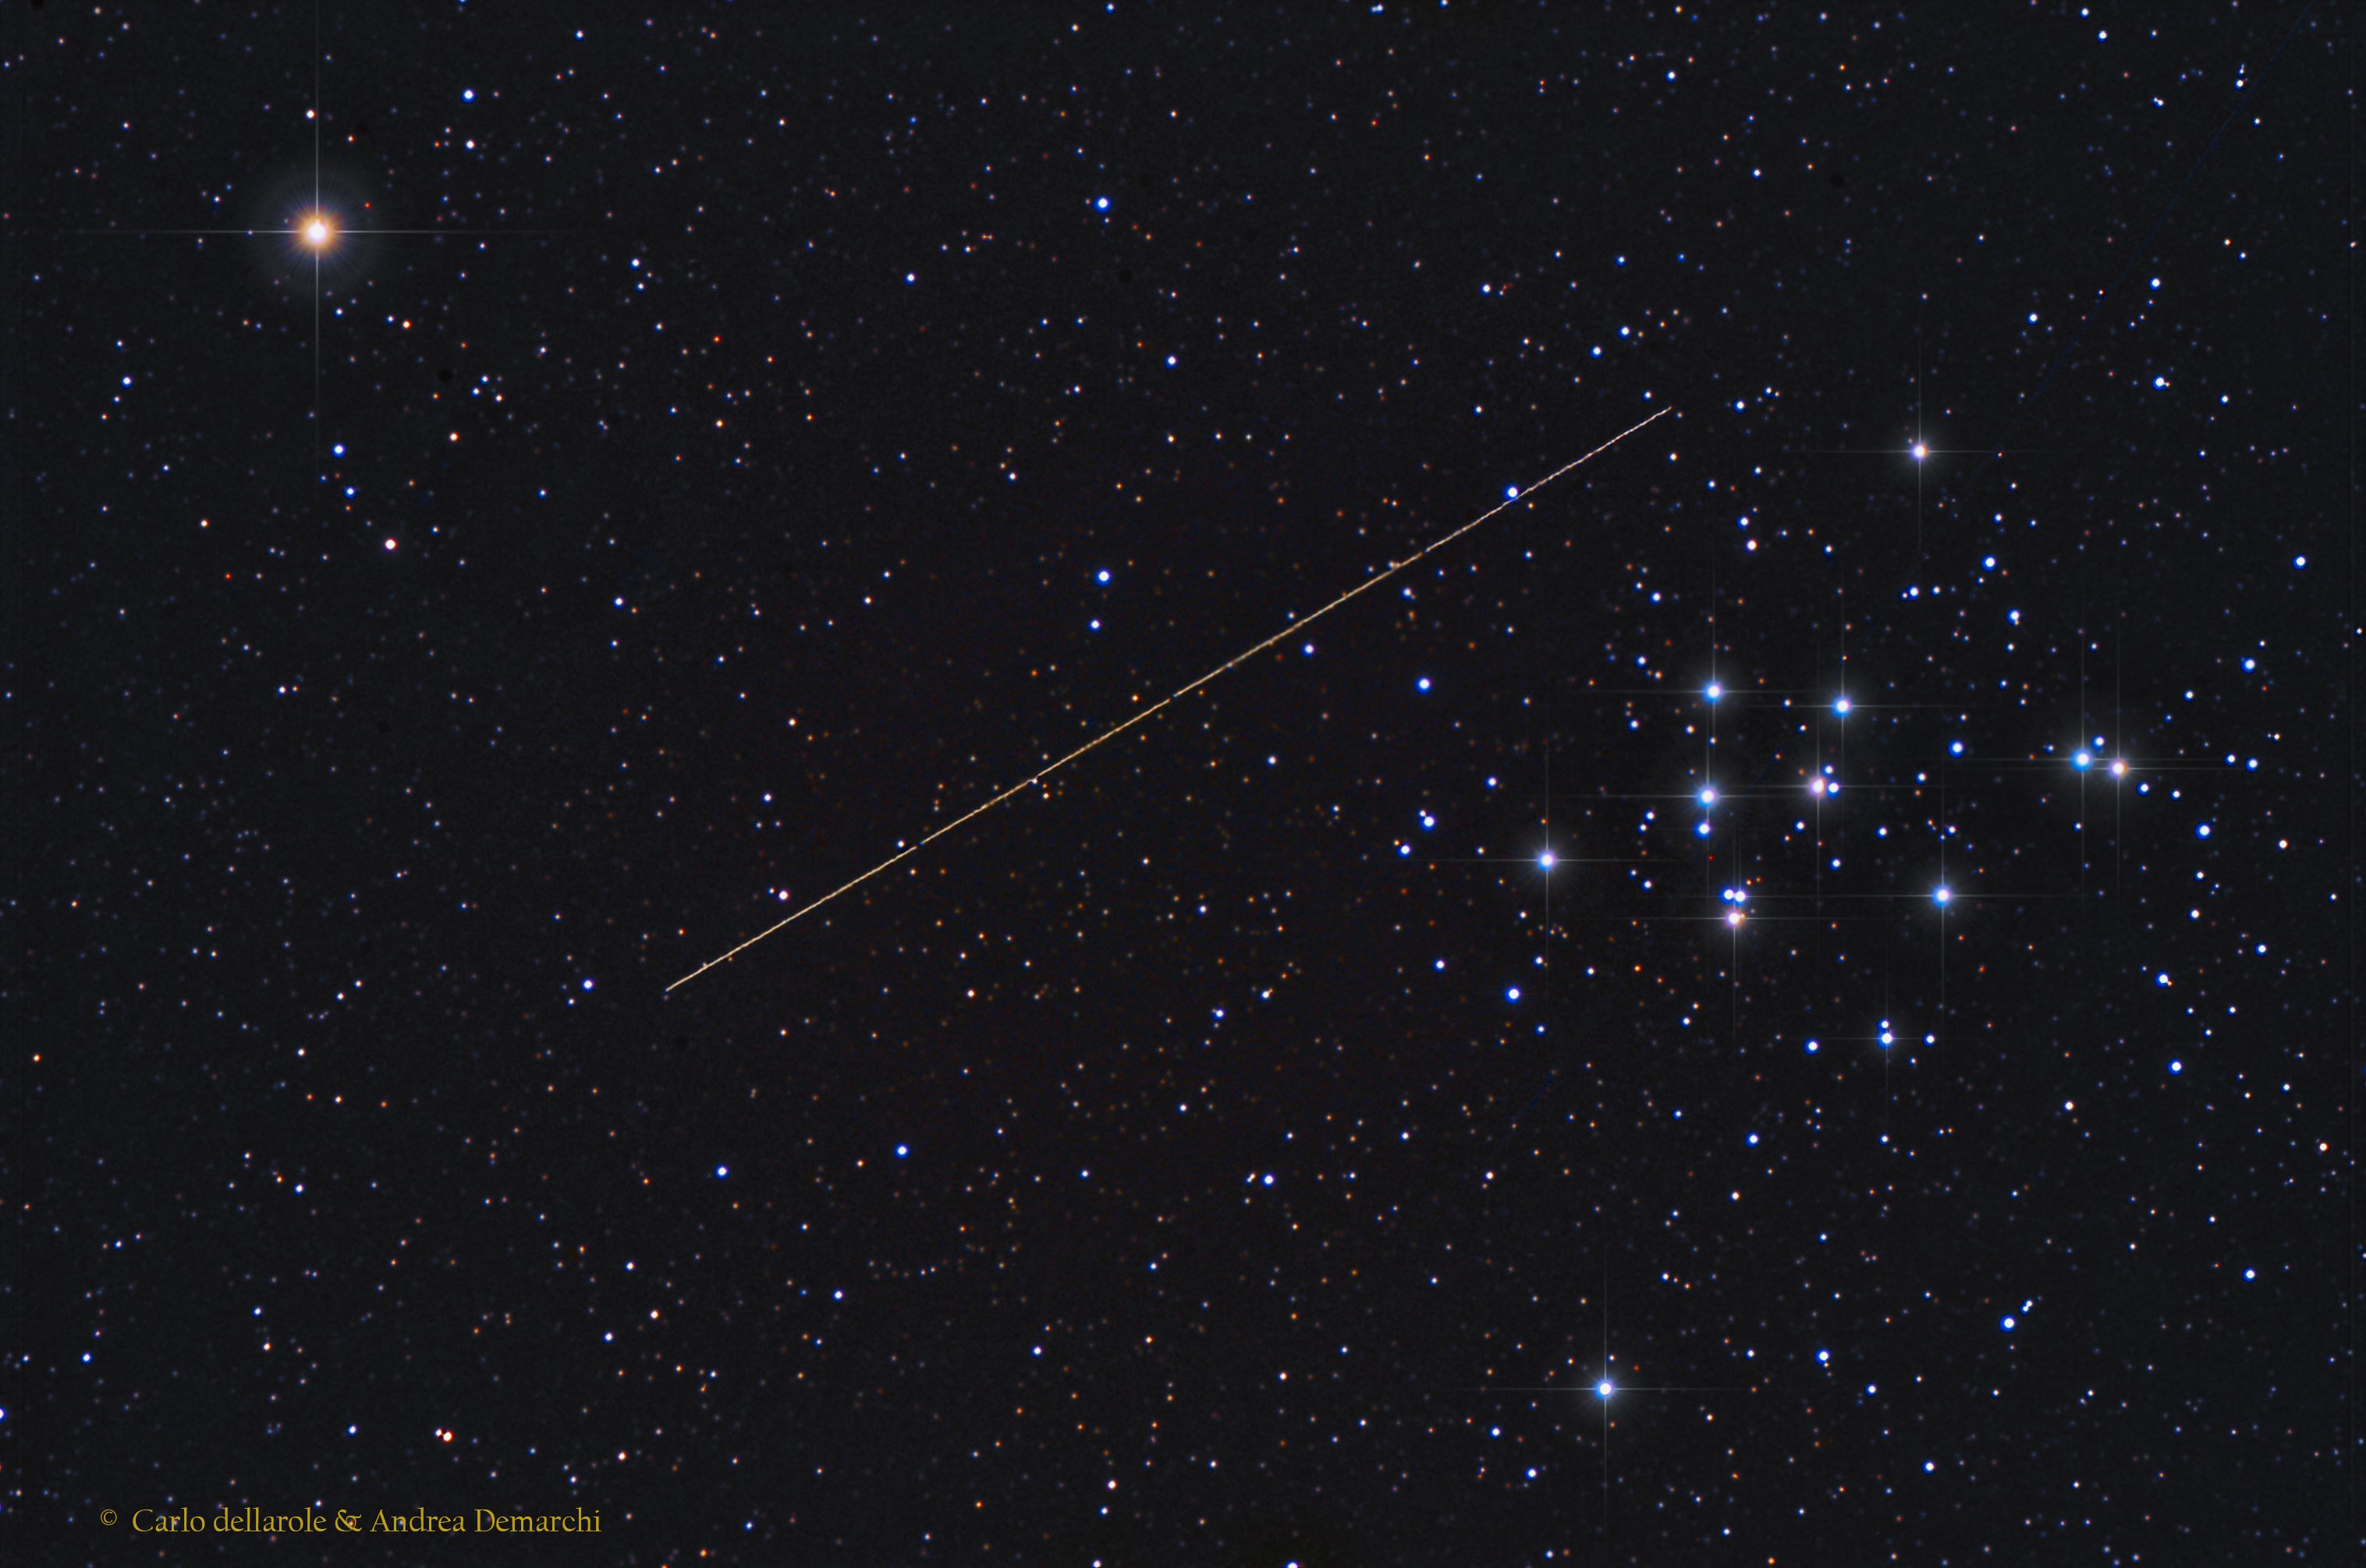 Open cluster M44 with NEO 2004 BL86 photographed in January 27, 2015 by Carlo Dellarole and Andrea Demarchi from Castelnuovo Nigra (To): 517 KB; click on the image to enlarge at 3033x2010 pixels